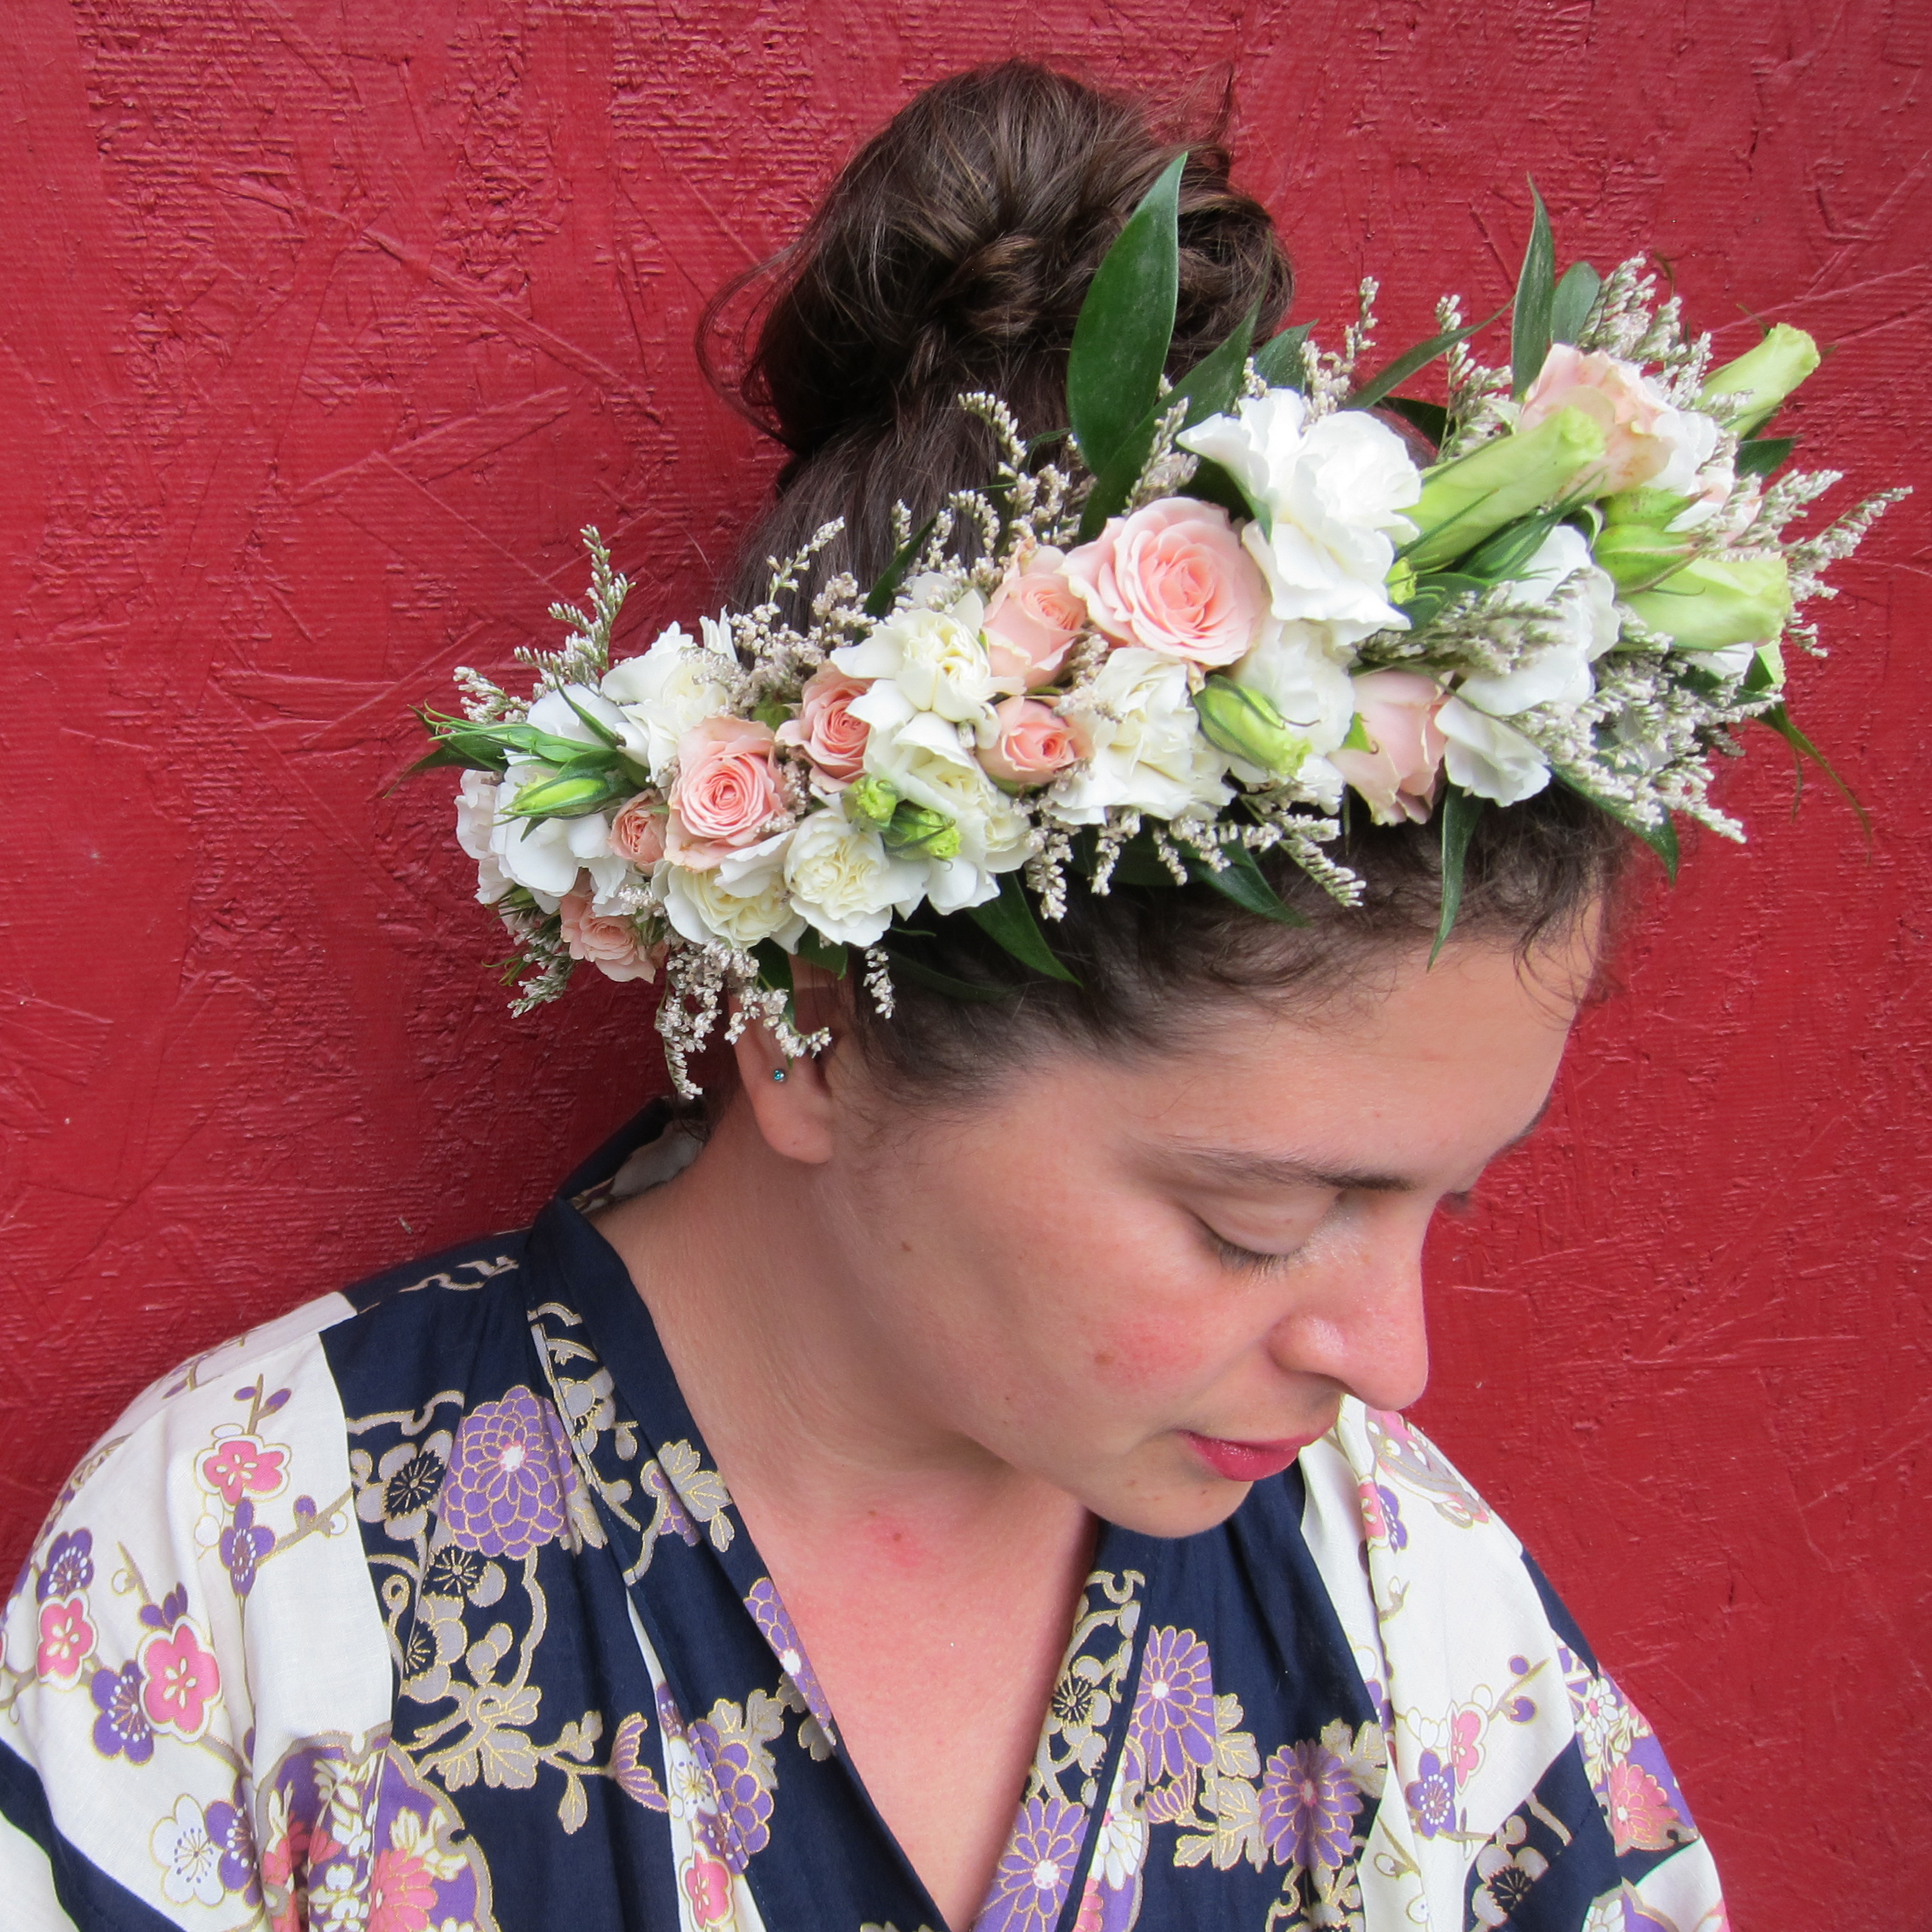 Full-szied bridal flower crown | Designed by Natasha Price of Paper Peony